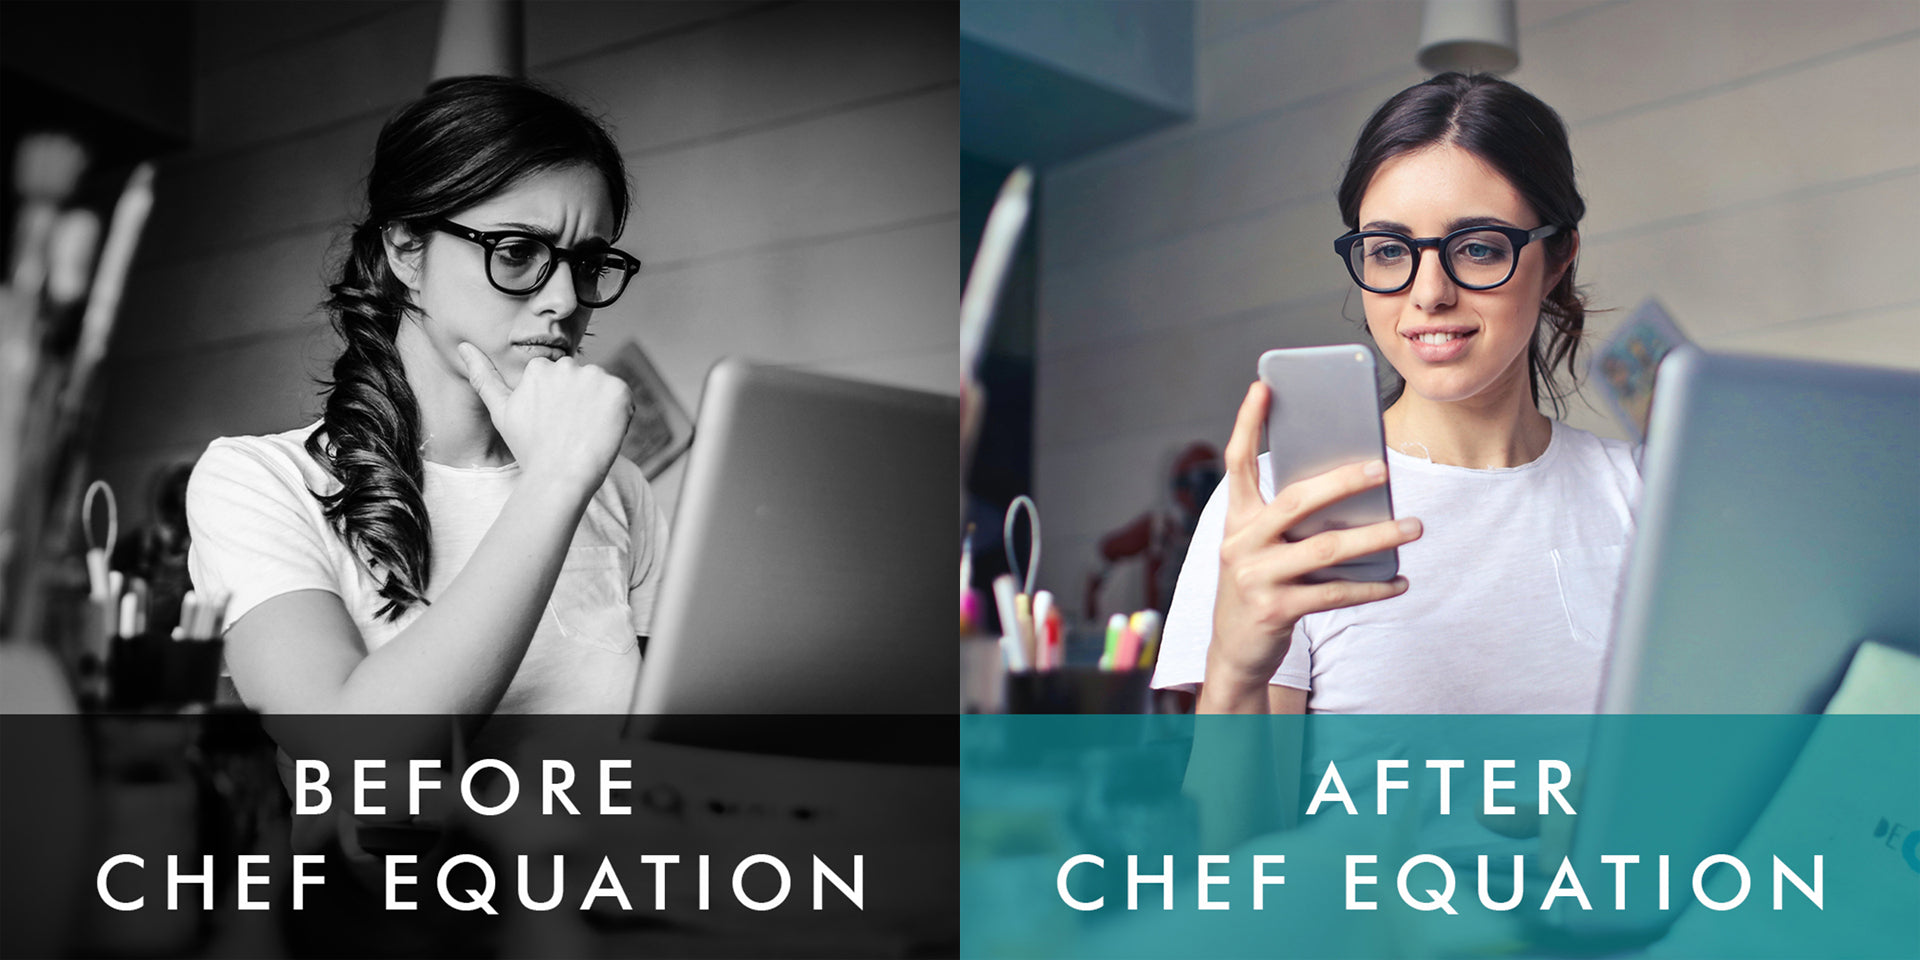 Before ChefEquation. After ChefEquation.